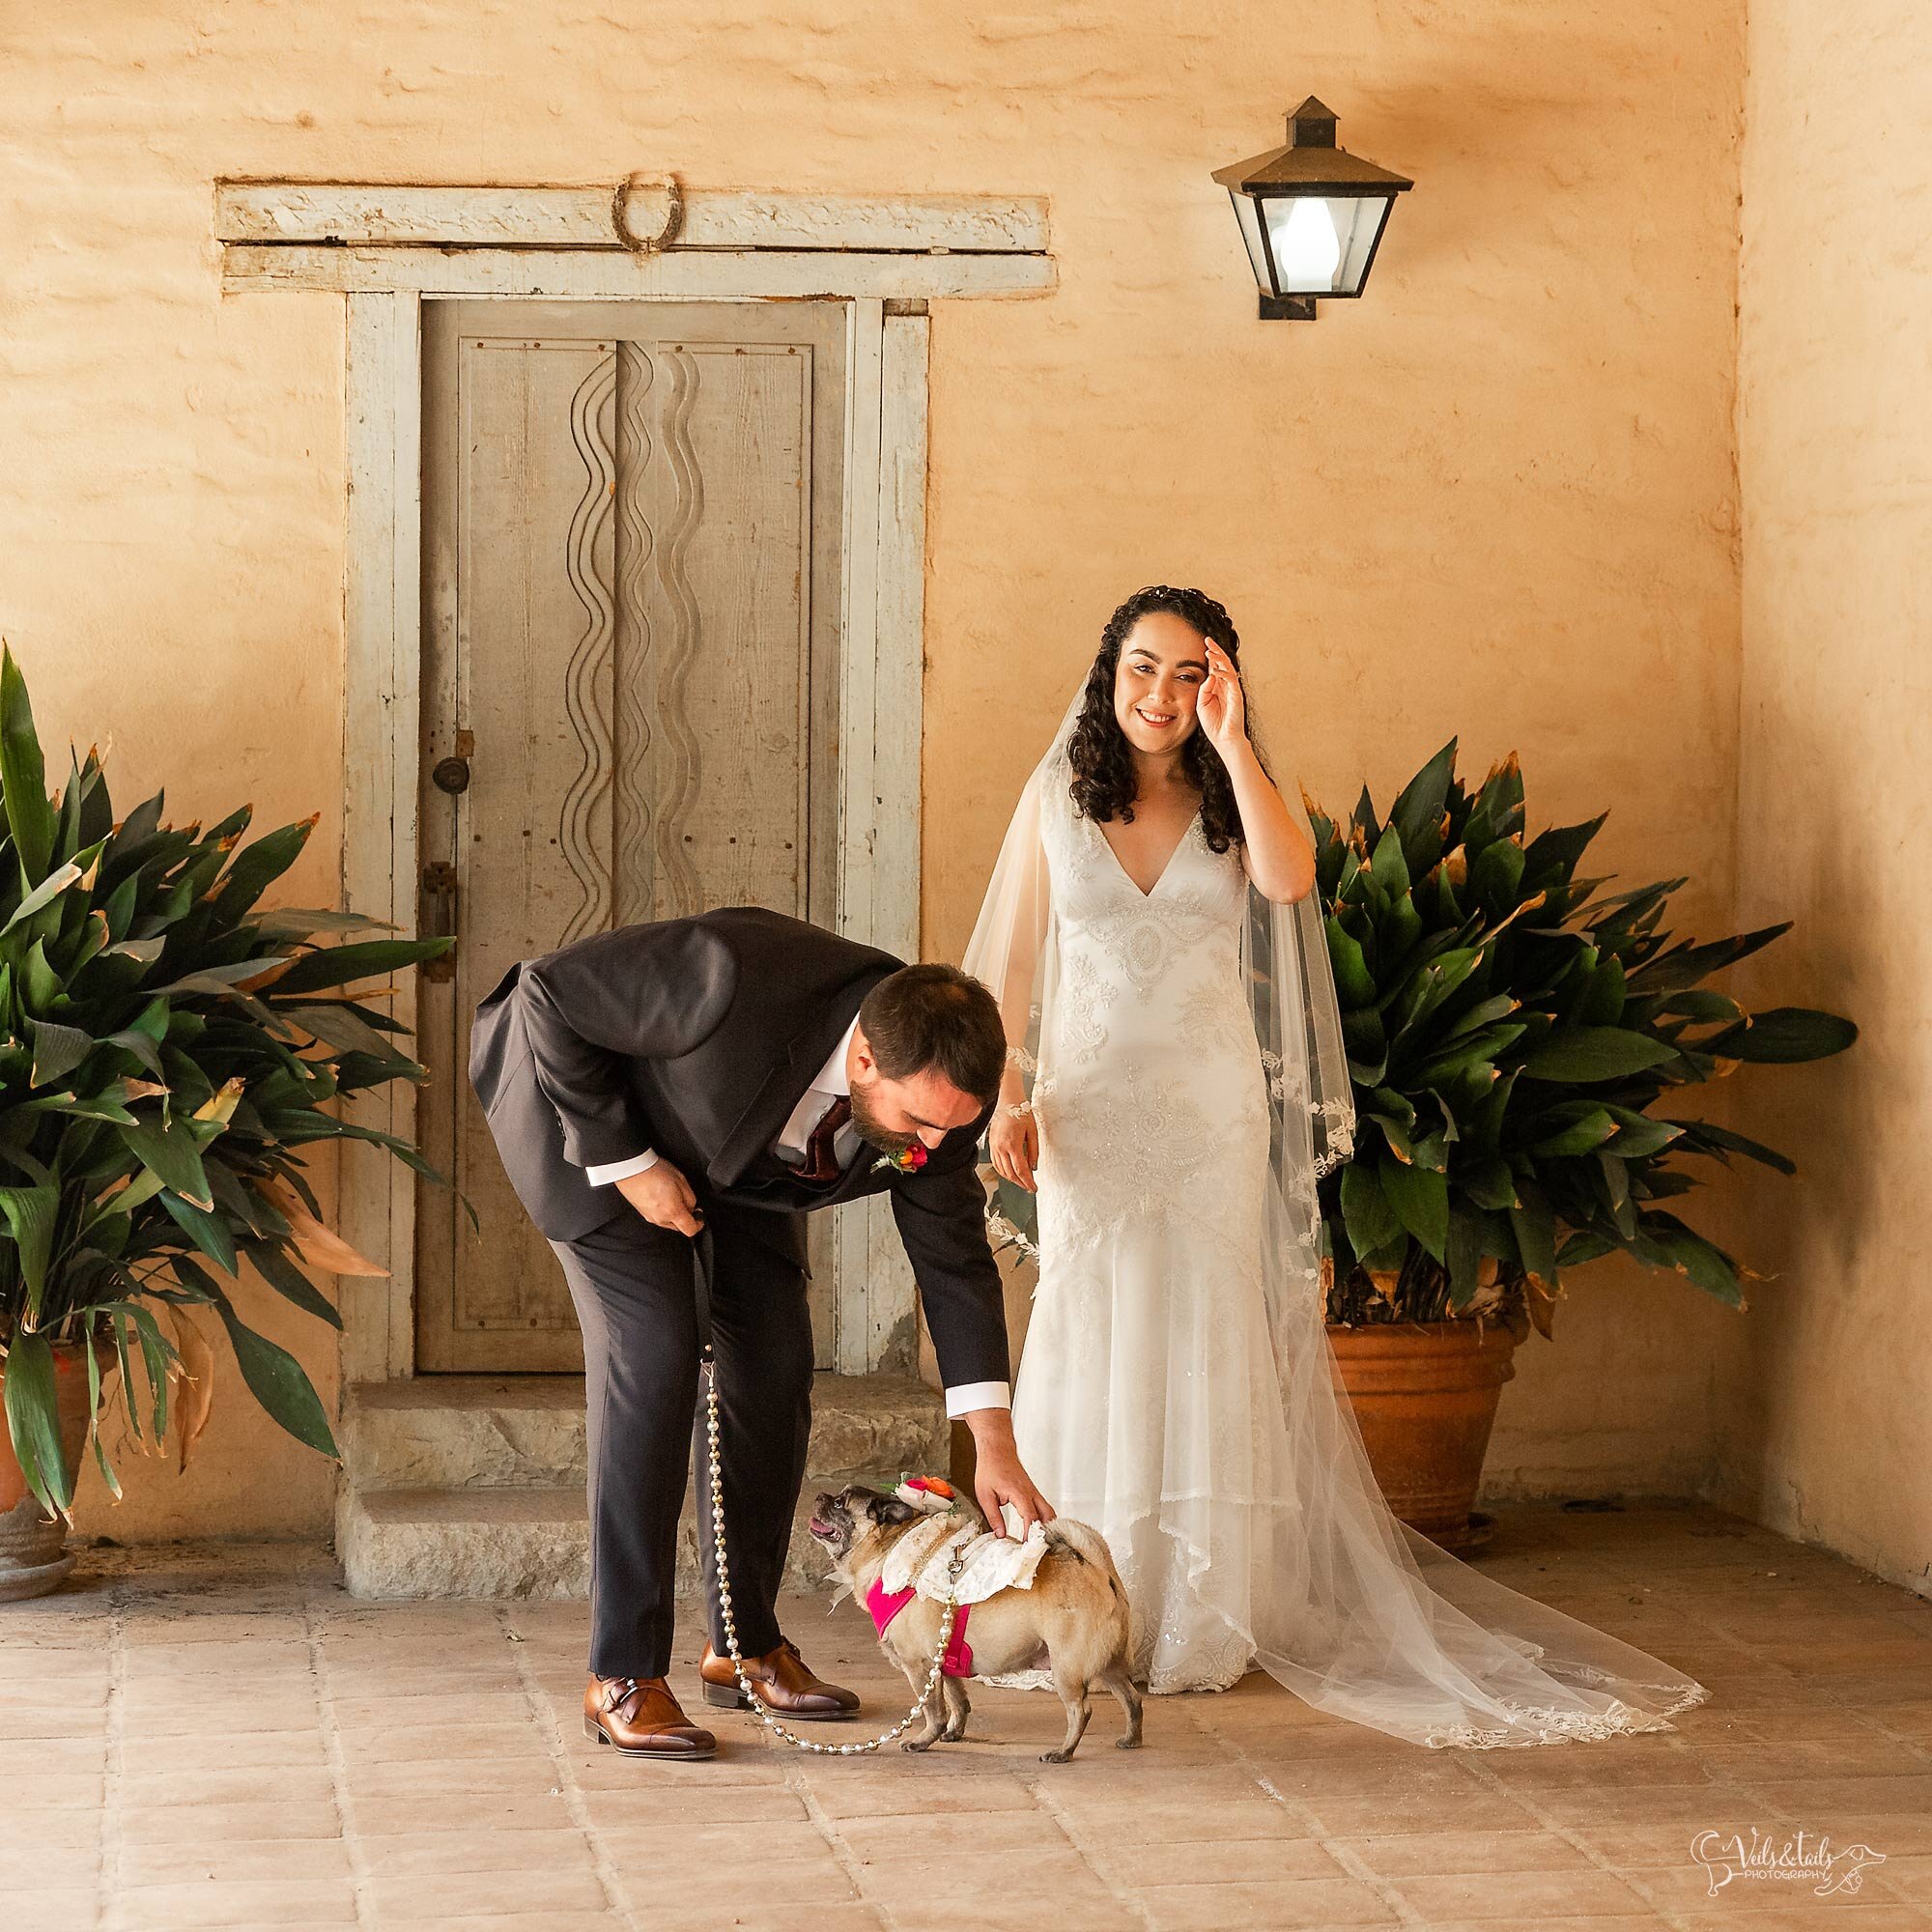 Bring your dog to your wedding, Veils &amp; Tails wedding photography